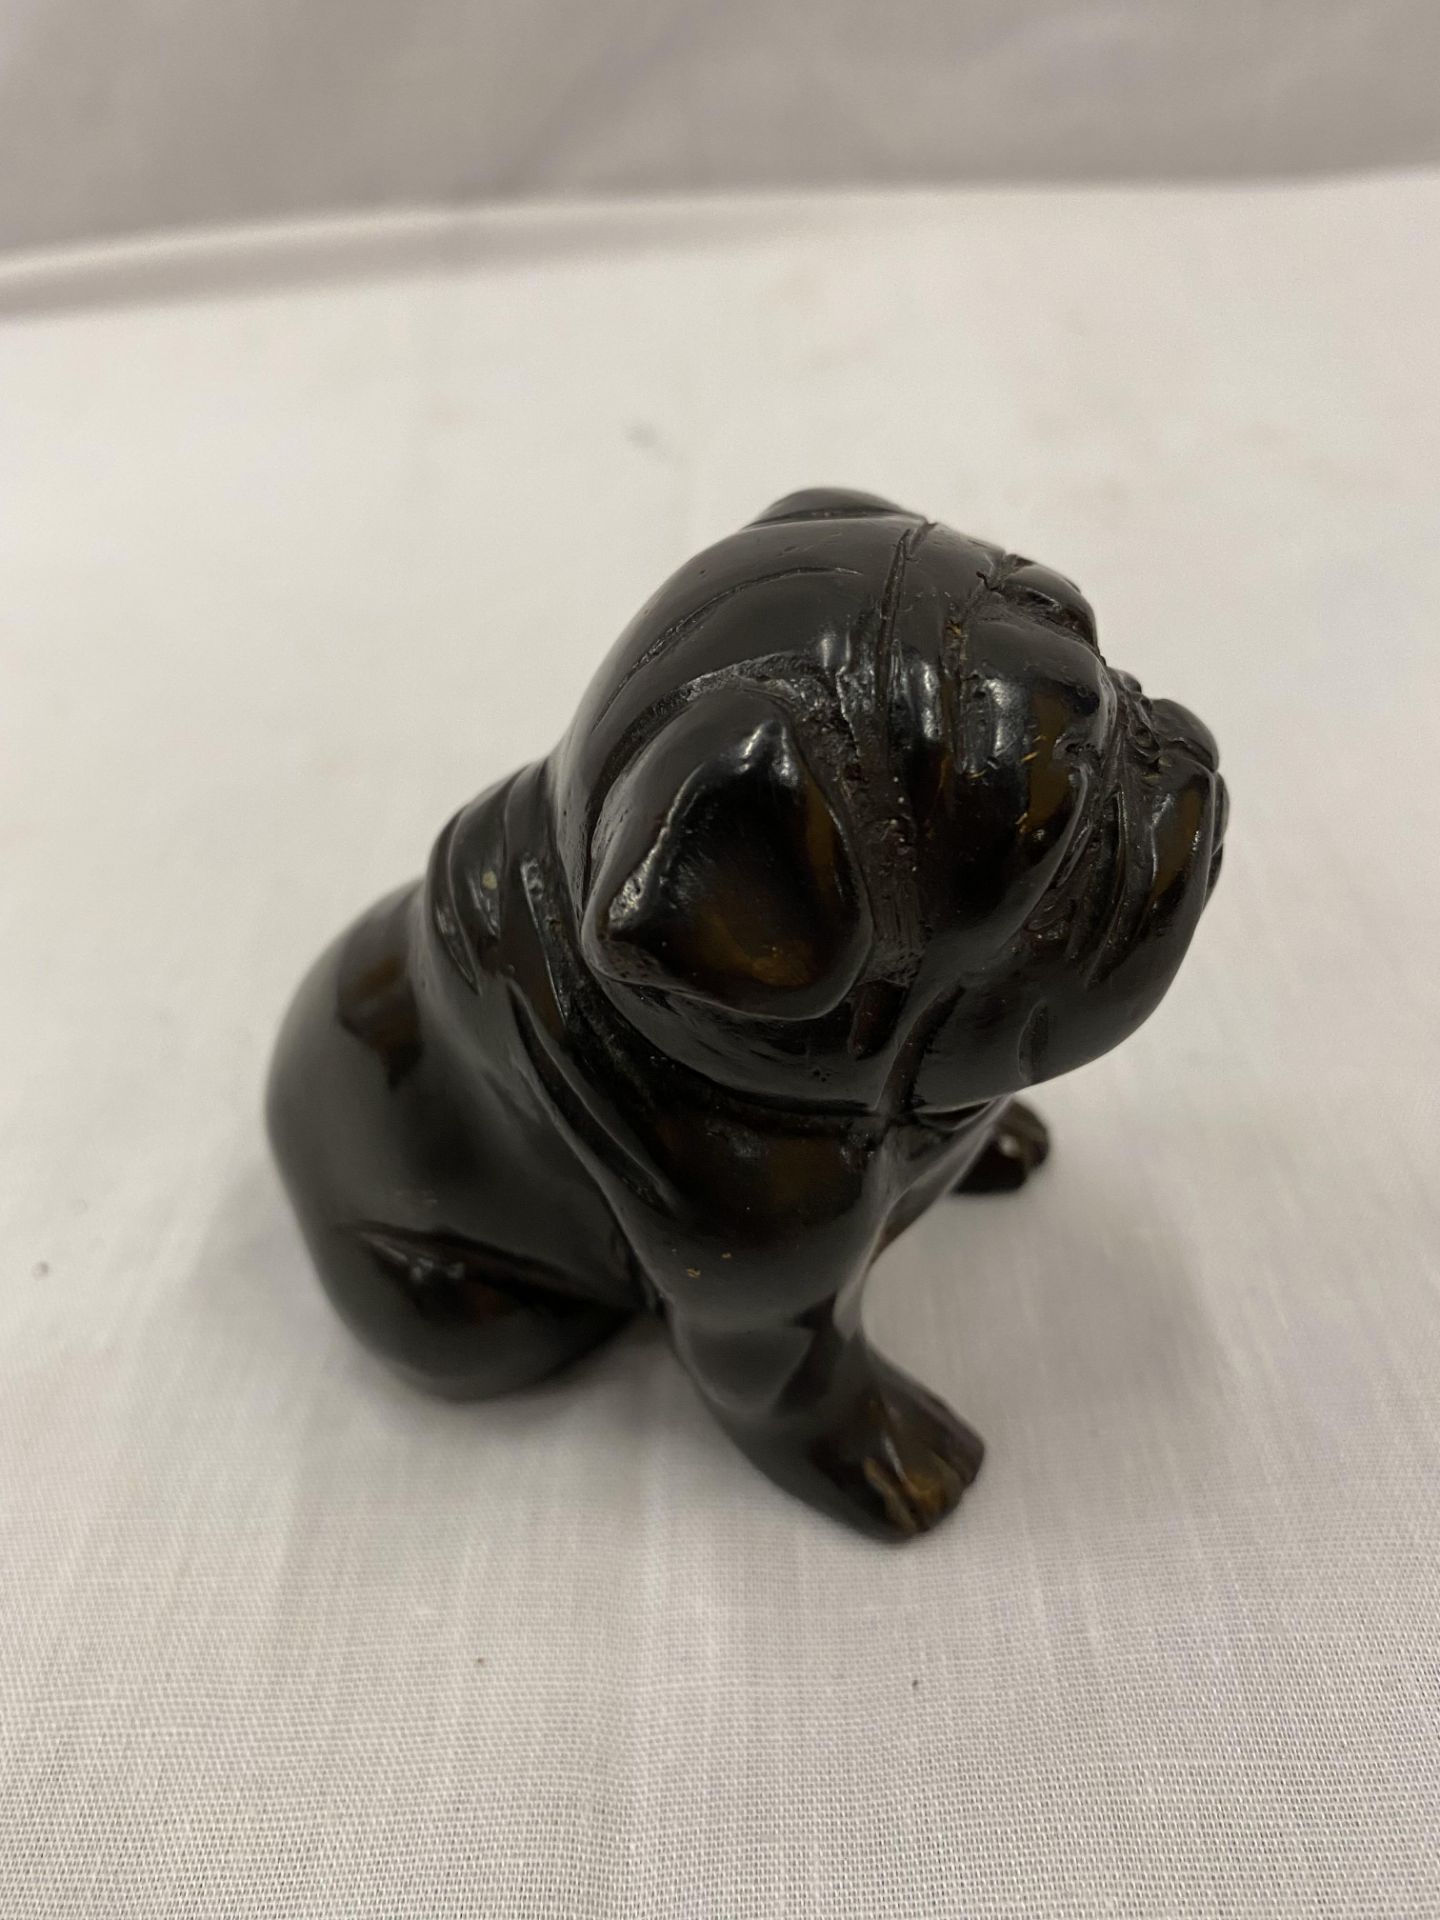 A PAIR OF BRONZE BULLDOGS, ONE SITTING AND ONE LAYING DOWN, HEIGHT 7CM AND 4CM - Image 16 of 22